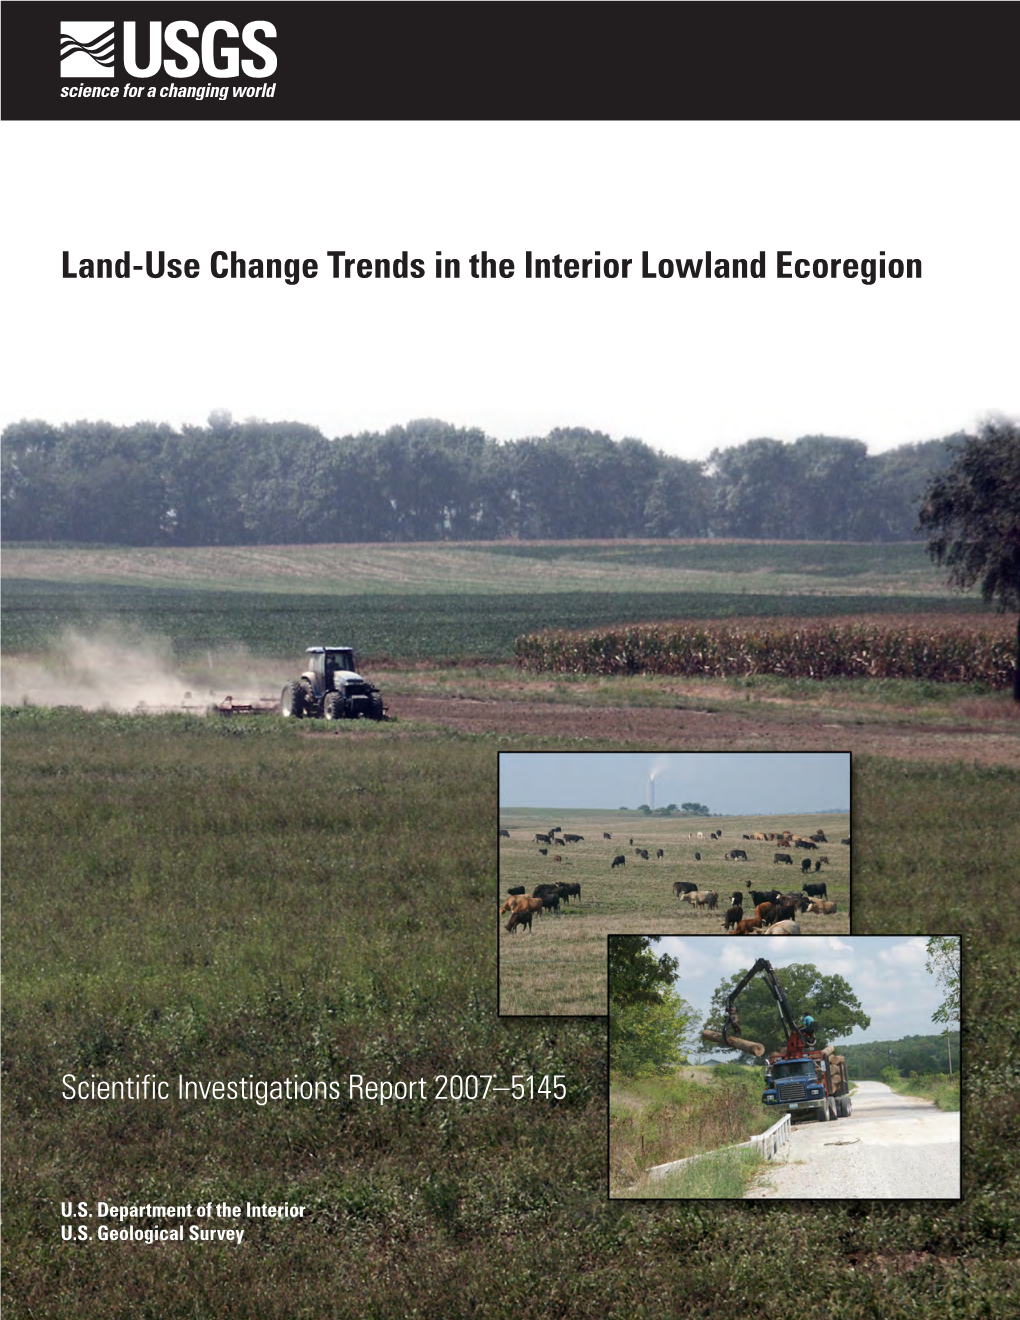 Land-Use Change Trends in the Interior Lowland Ecoregion